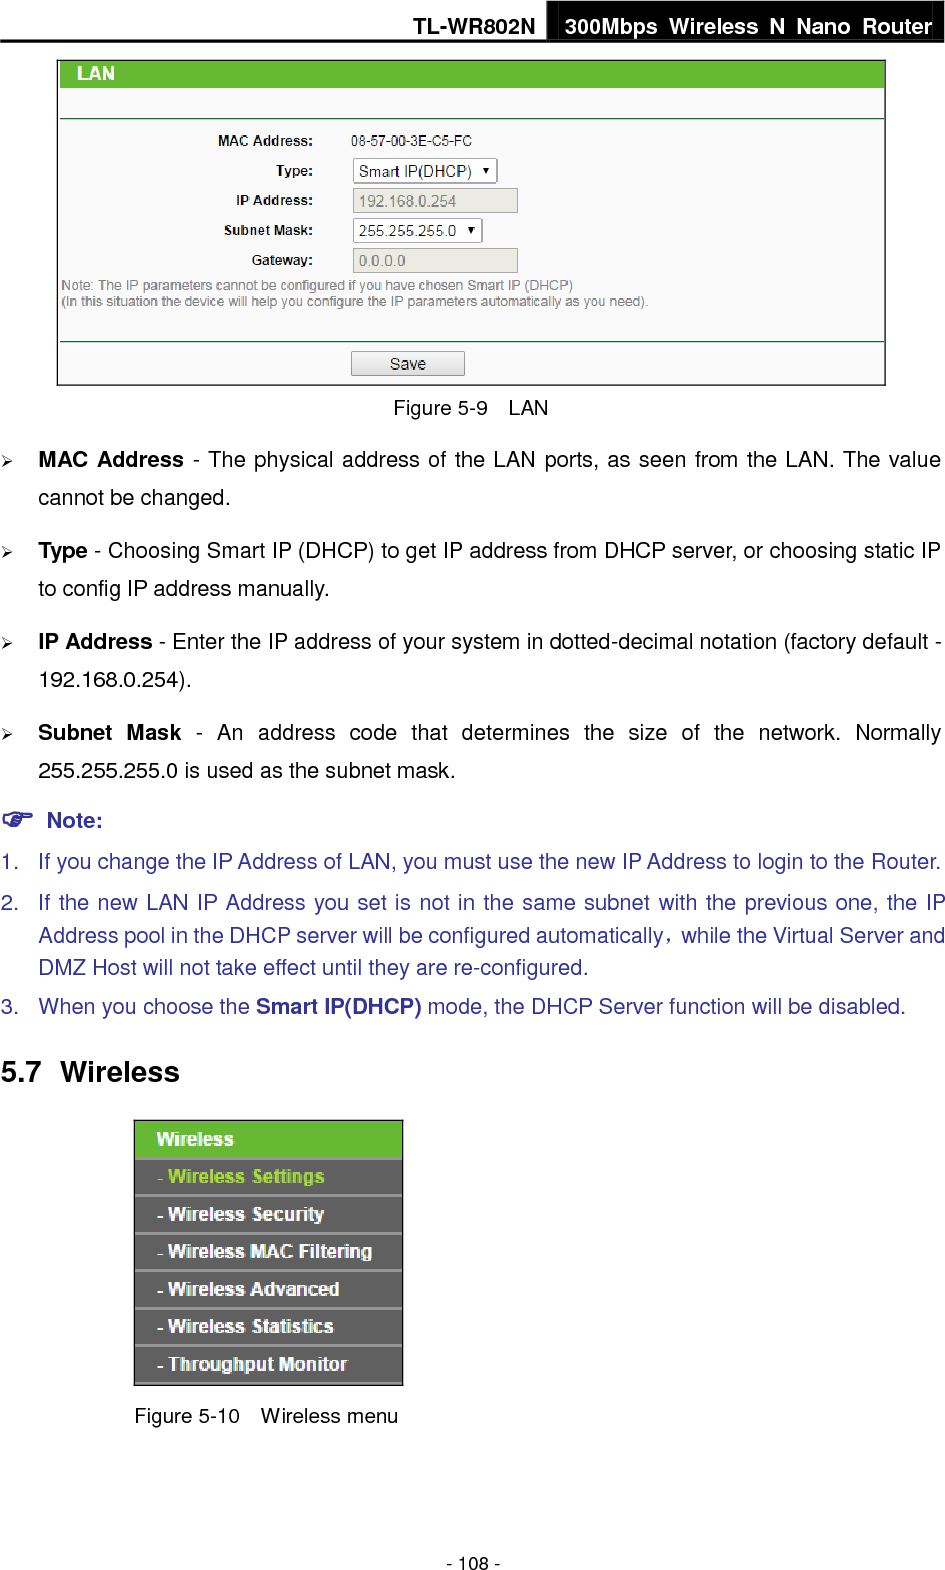 TL-WR802N 300Mbps  Wireless  N  Nano  Router  - 108 -  Figure 5-9  LAN  MAC Address - The physical address of the LAN ports, as seen from the LAN. The value cannot be changed.  Type - Choosing Smart IP (DHCP) to get IP address from DHCP server, or choosing static IP to config IP address manually.  IP Address - Enter the IP address of your system in dotted-decimal notation (factory default - 192.168.0.254).  Subnet  Mask  -  An  address  code  that  determines  the  size  of  the  network.  Normally 255.255.255.0 is used as the subnet mask.  Note: 1.  If you change the IP Address of LAN, you must use the new IP Address to login to the Router.   2.  If the new LAN IP Address you set is not in the same subnet with the previous one, the IP Address pool in the DHCP server will be configured automatically，while the Virtual Server and DMZ Host will not take effect until they are re-configured. 3.  When you choose the Smart IP(DHCP) mode, the DHCP Server function will be disabled. 5.7  Wireless  Figure 5-10  Wireless menu 